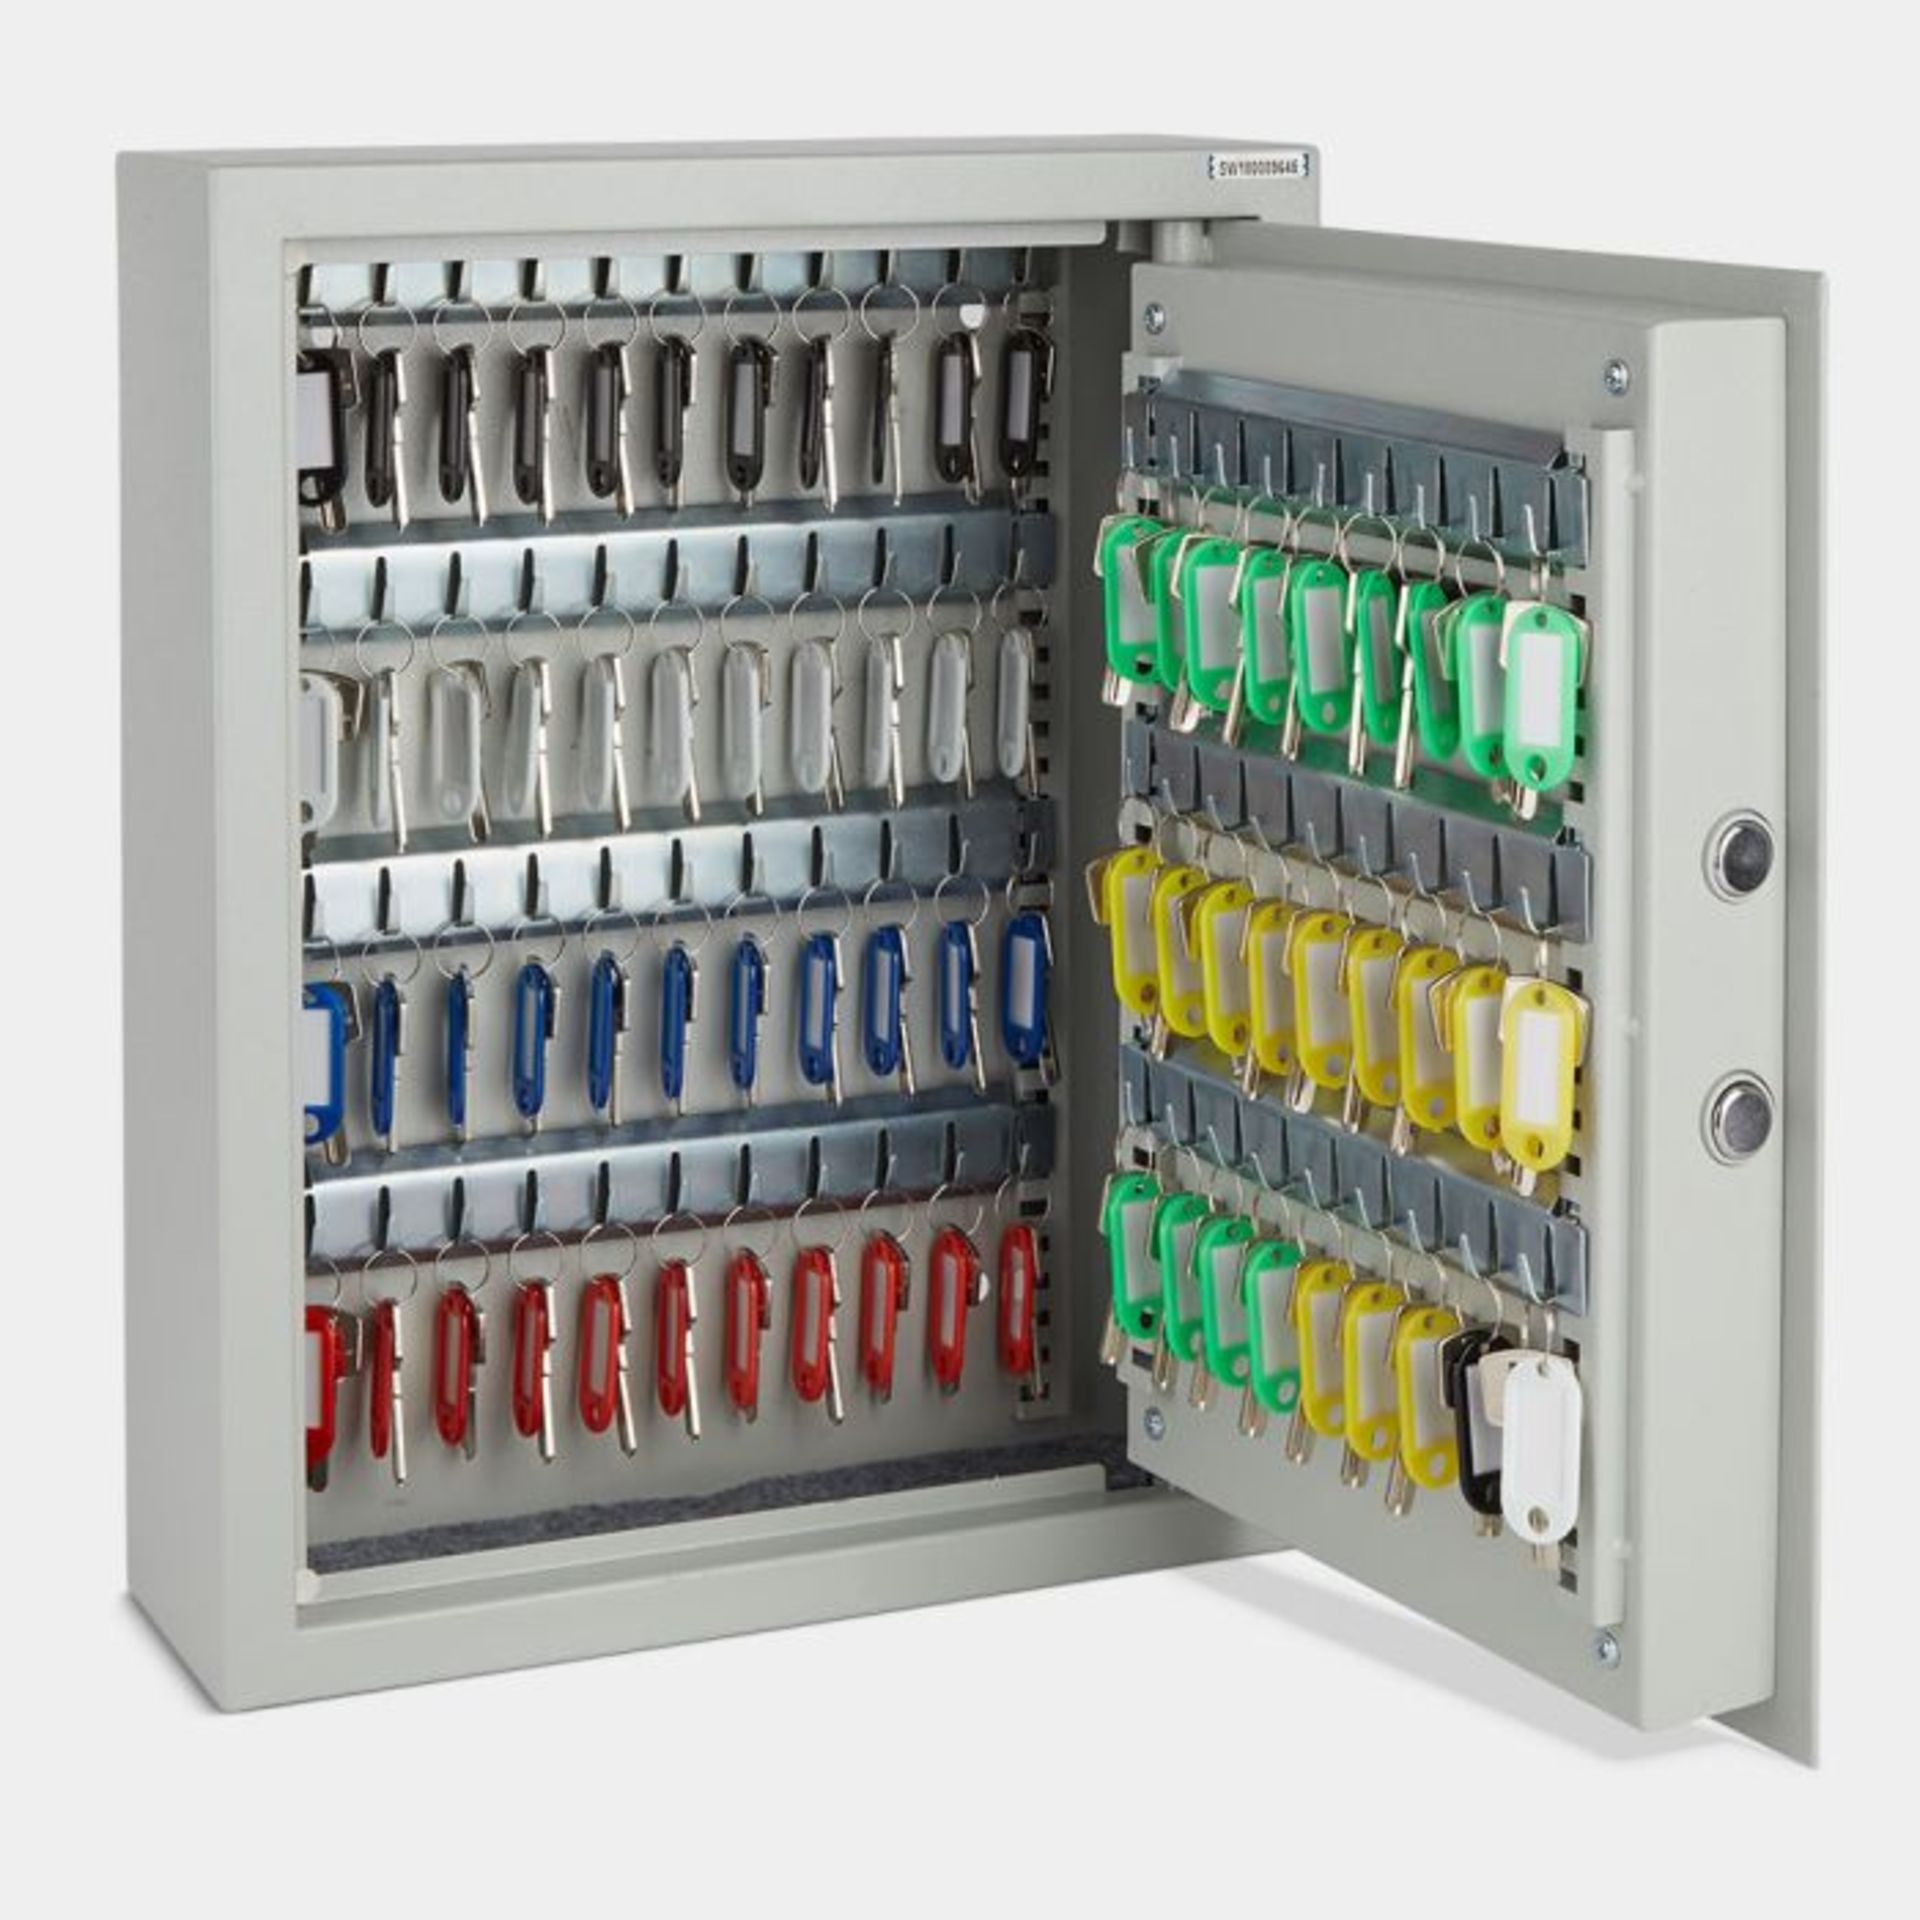 71 Key Digital Cabinet Safe. - ER35. If you’re looking for a secure and well-organised solution to